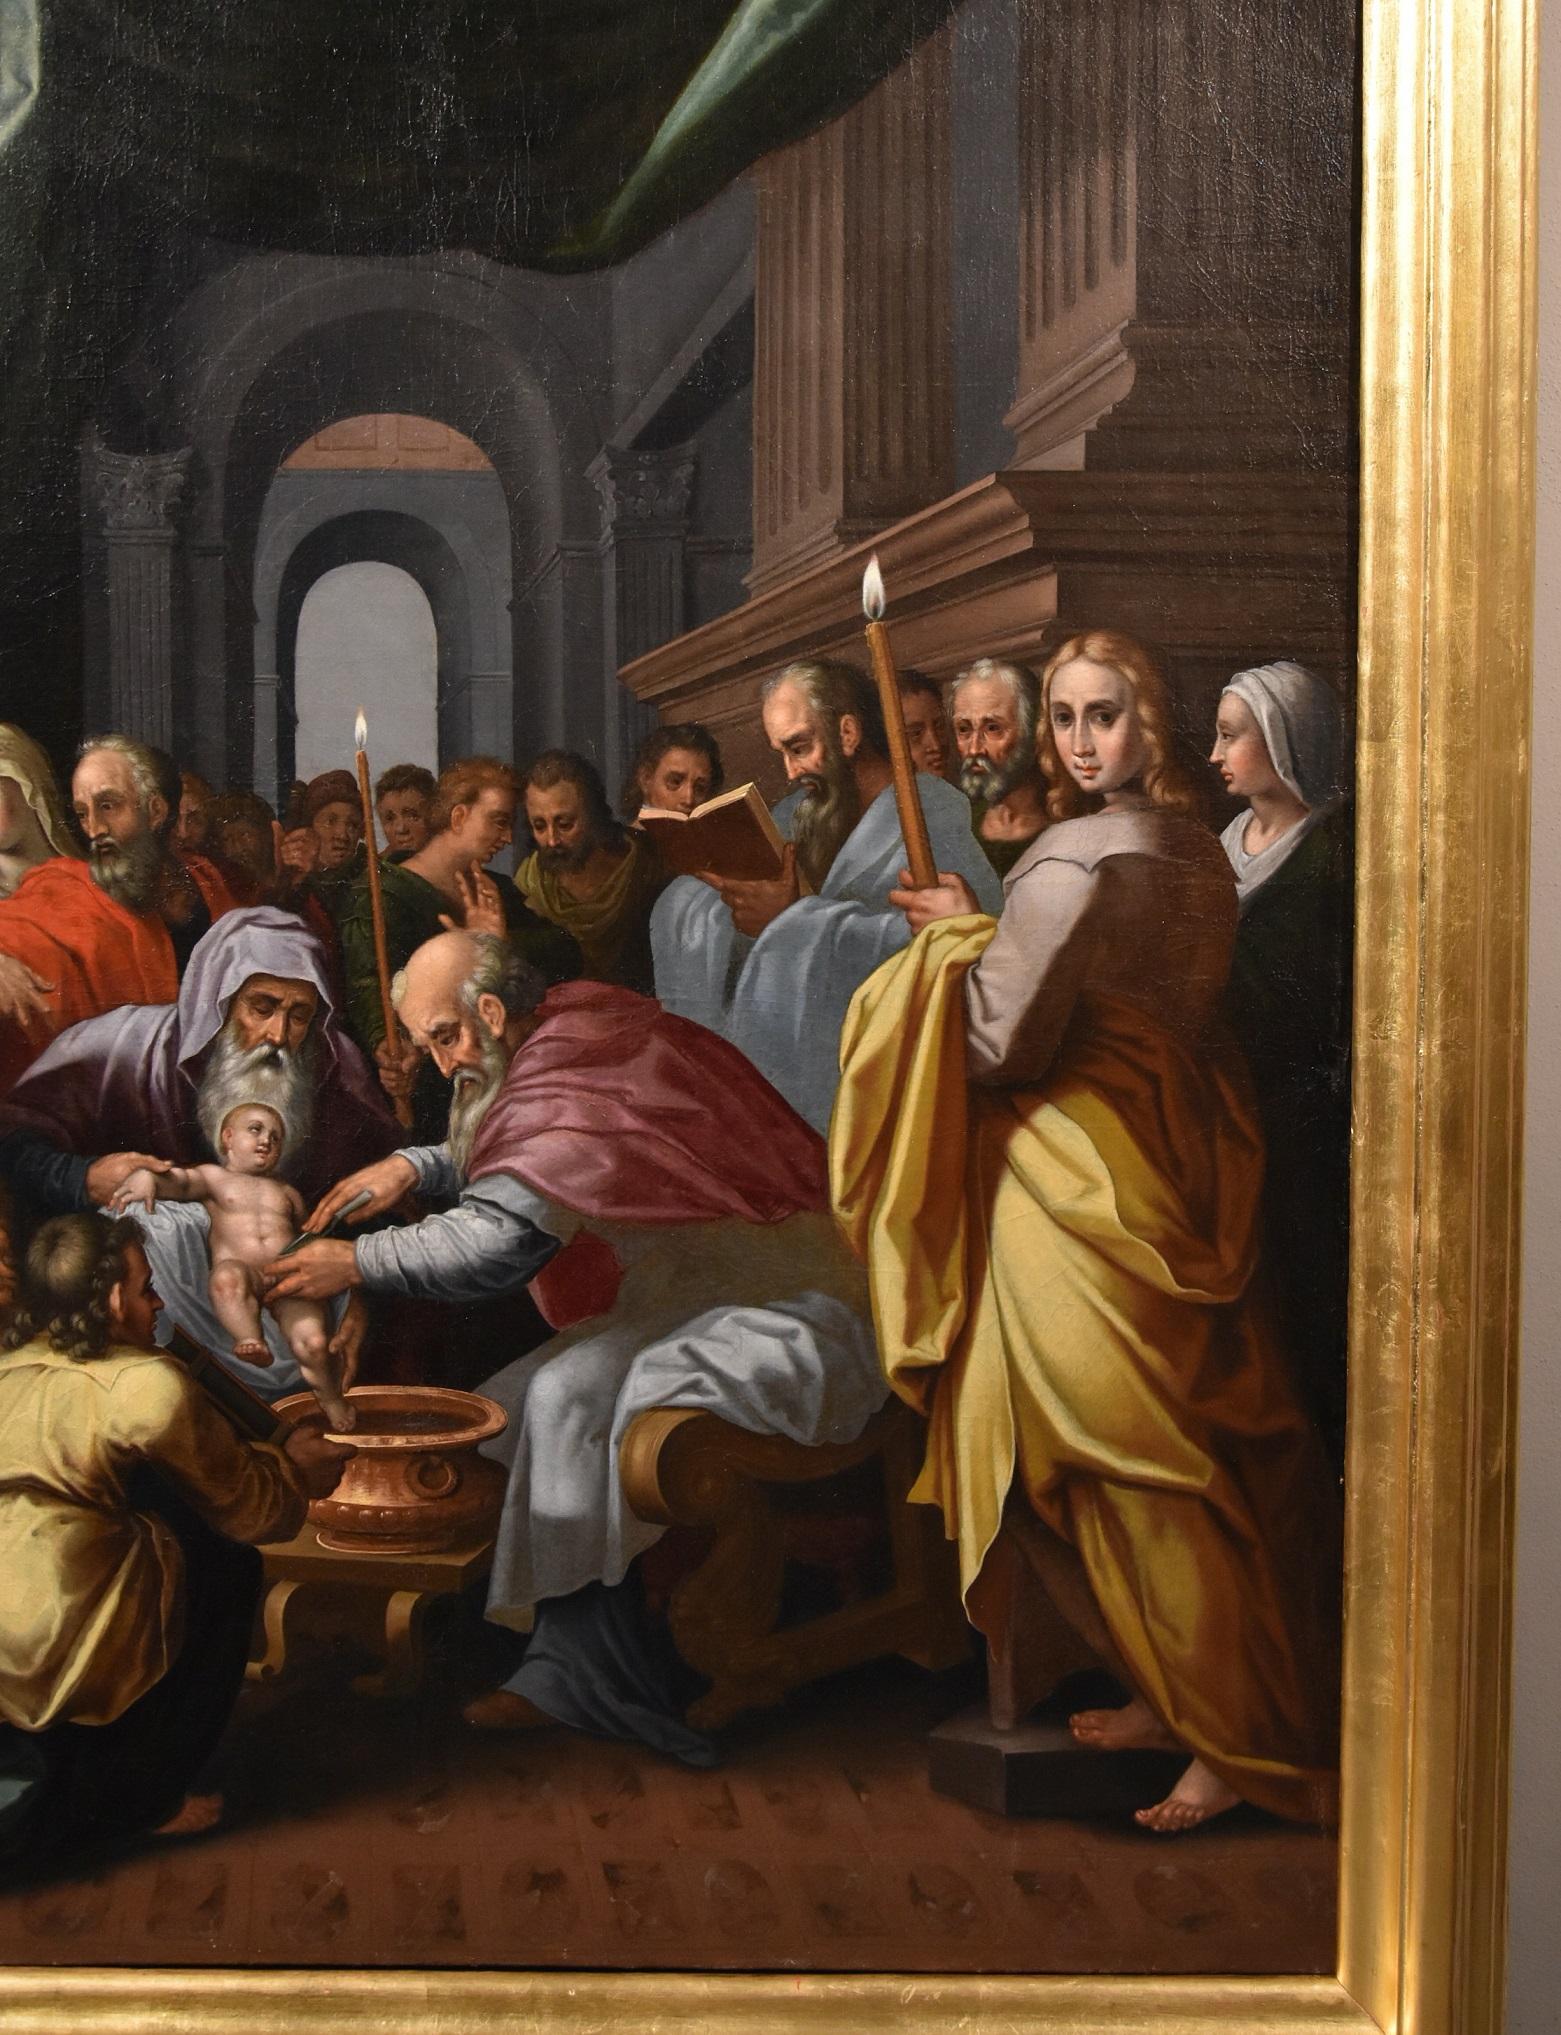 Gérard de Lairesse (Liège 1641 - Amsterdam 1711), attributed
Circumcision of Christ

Oil on canvas, 120 x 102 cm., In frame 138 x 119 cm.

The painting, of excellent quality and conservation, illustrates a passage narrated in the Gospel of Luke